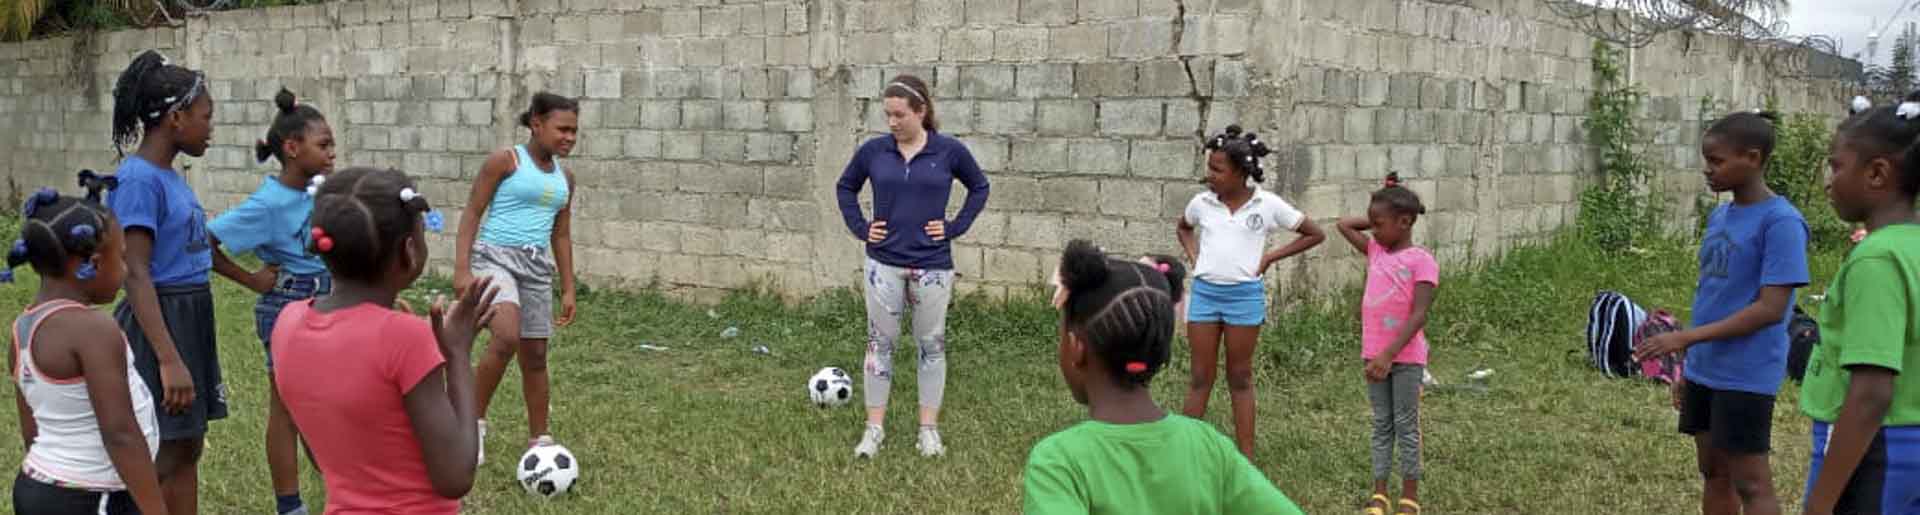 Katie Baird pictured at a soccer practice with girls from the two local schools Lafwa ran